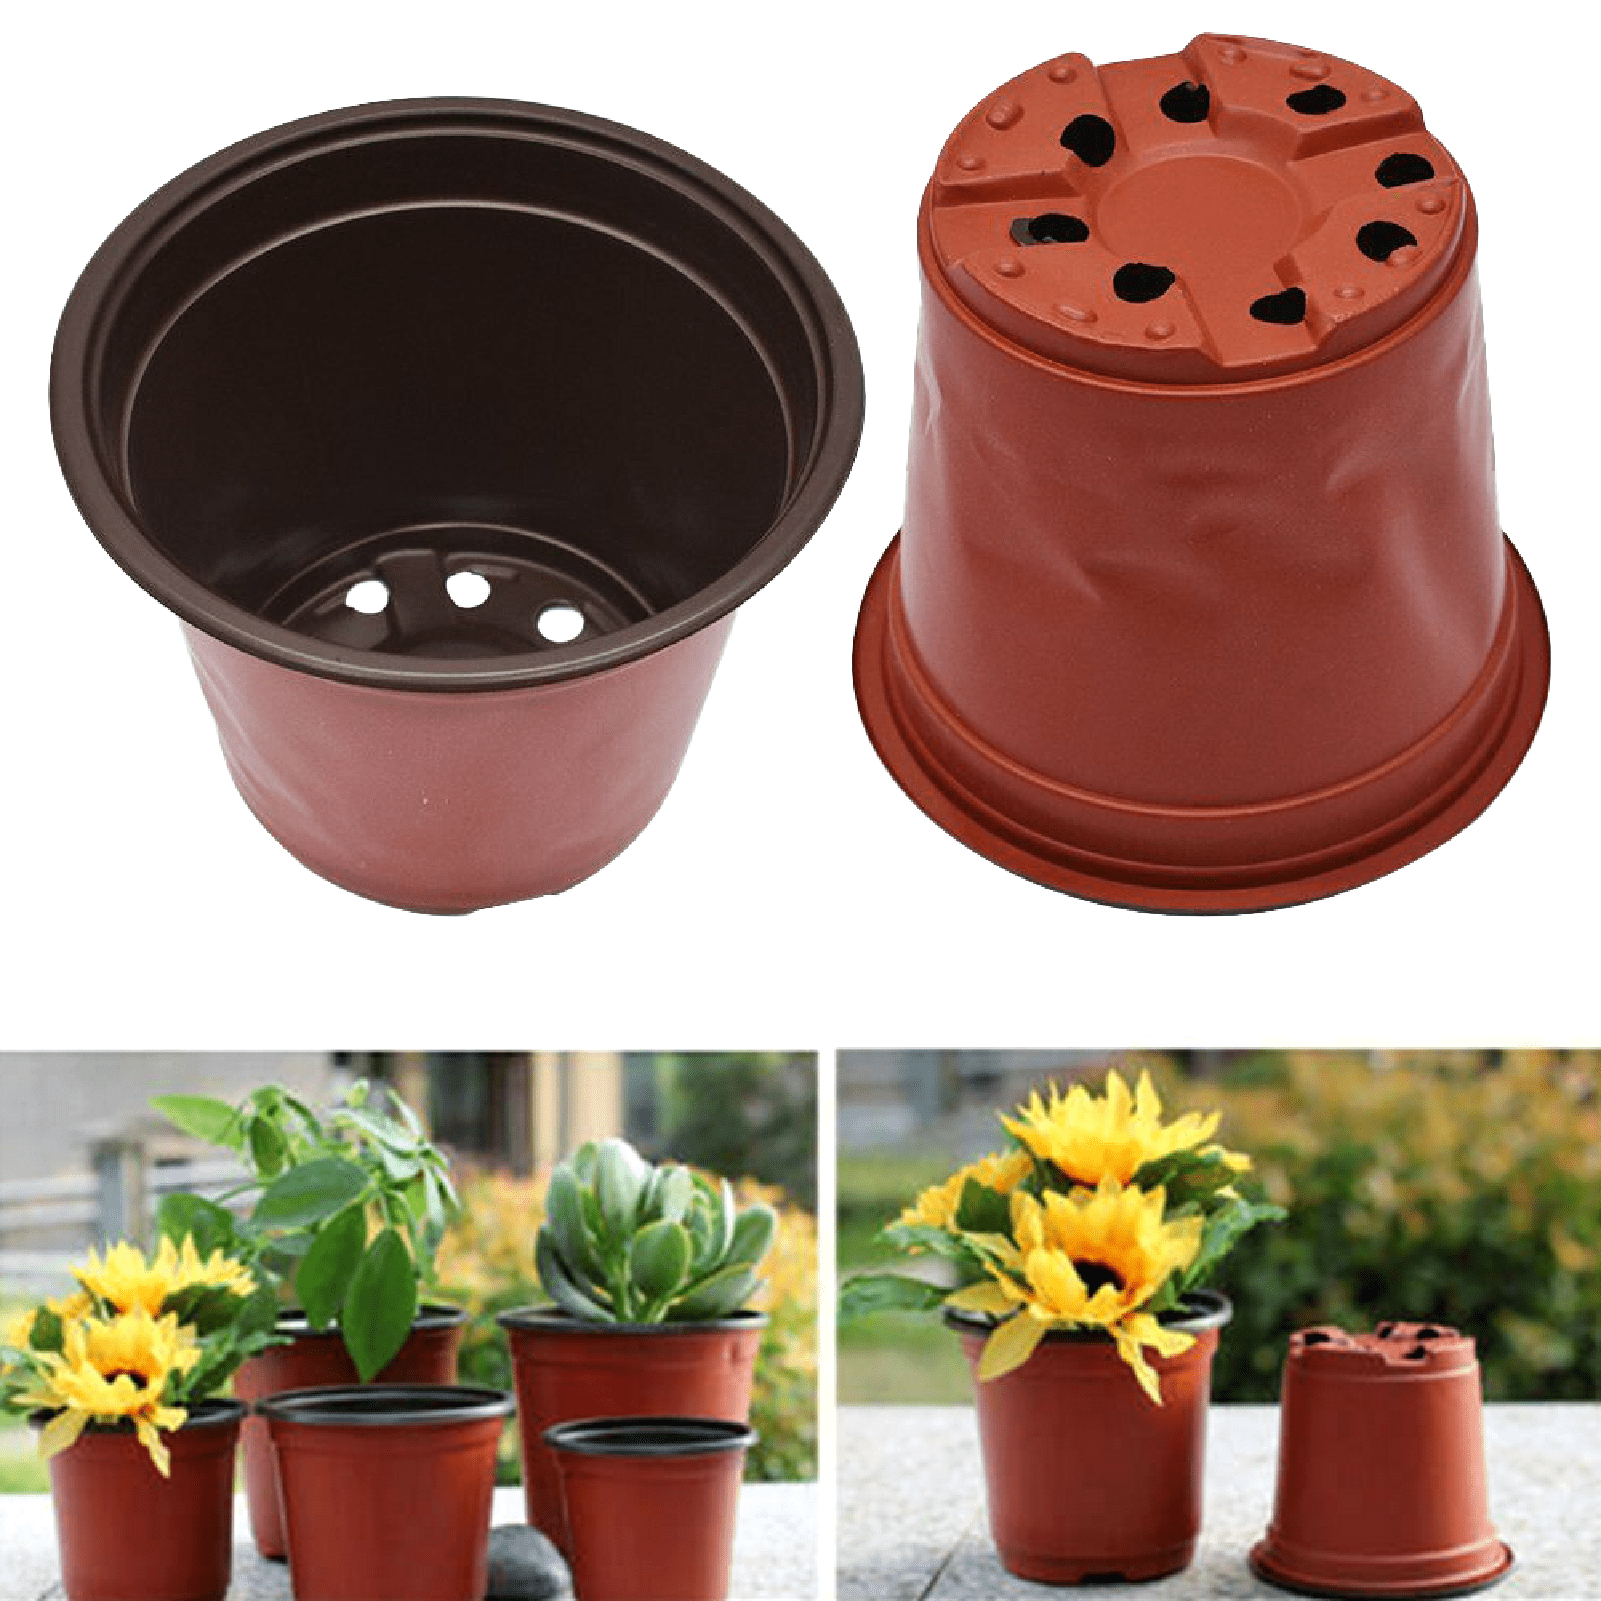 Details about   Plastic Planting Pots Seed Starter Grow Nursery Flower Herb Plant 50 Pack 6 Inch 